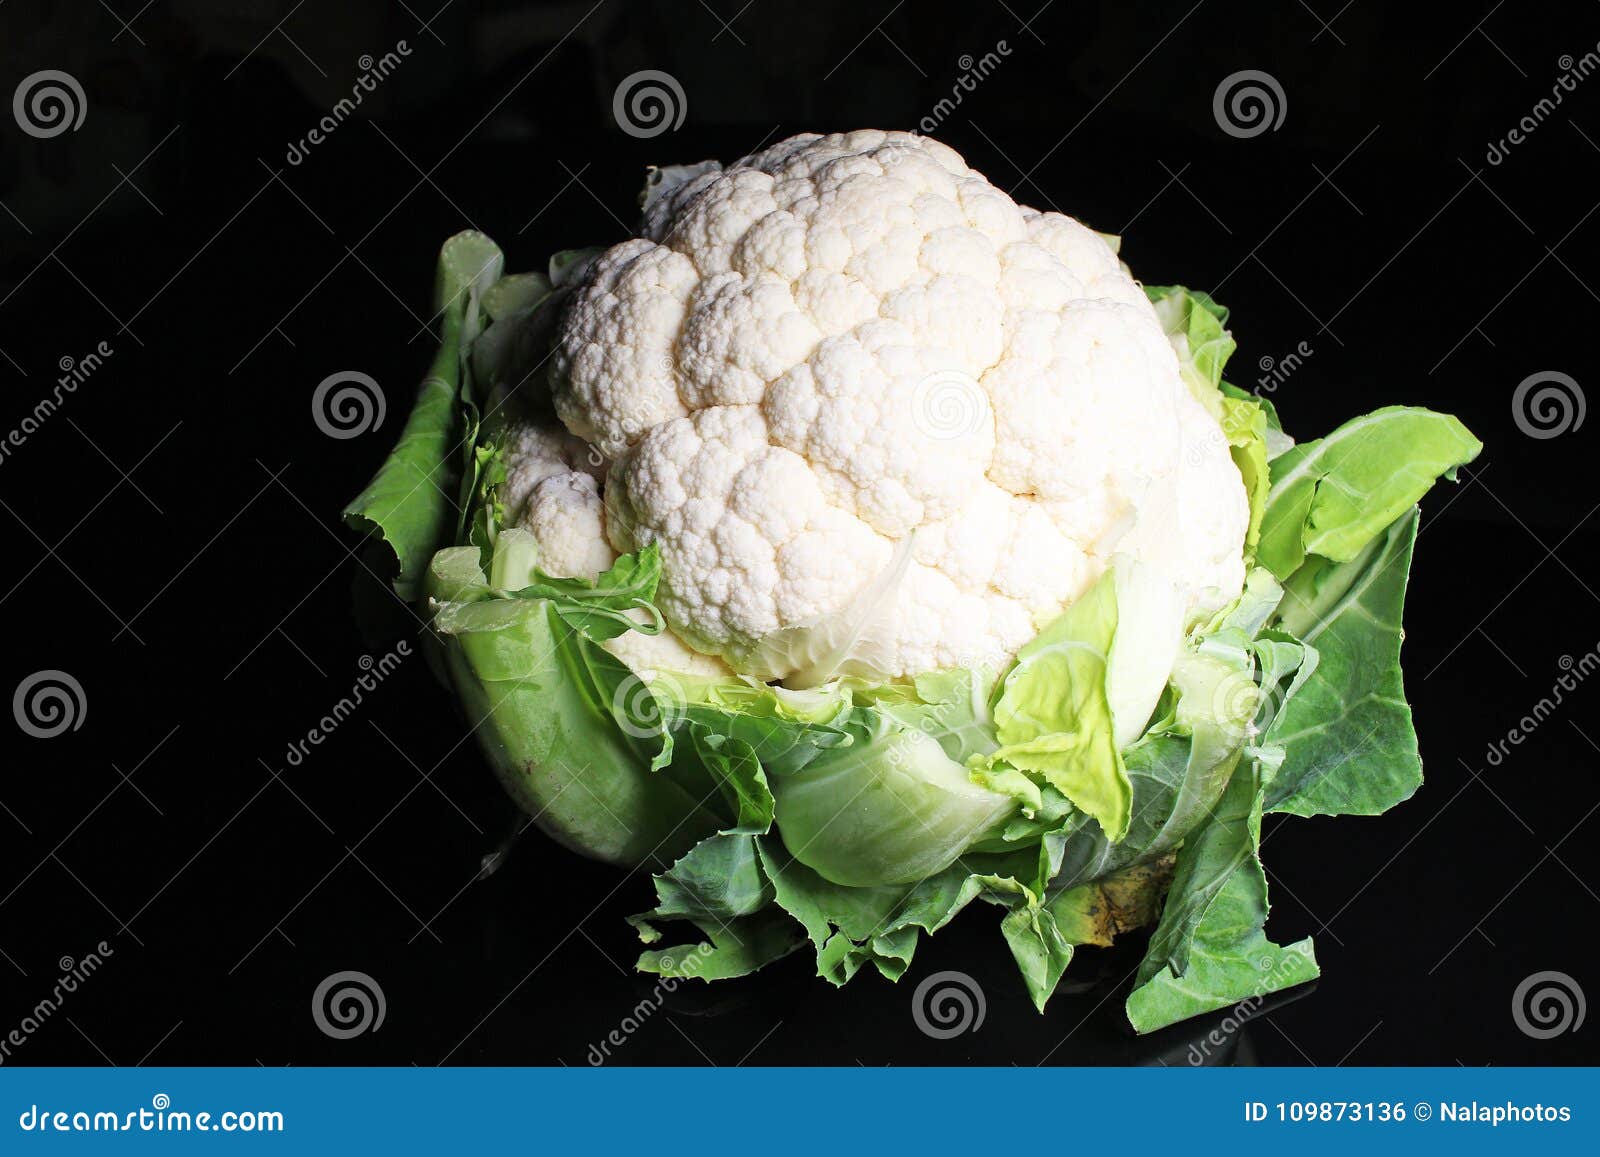 cauliflower head curd coliflor on black reflective studio background.  black shiny mirror mirrored background for every co